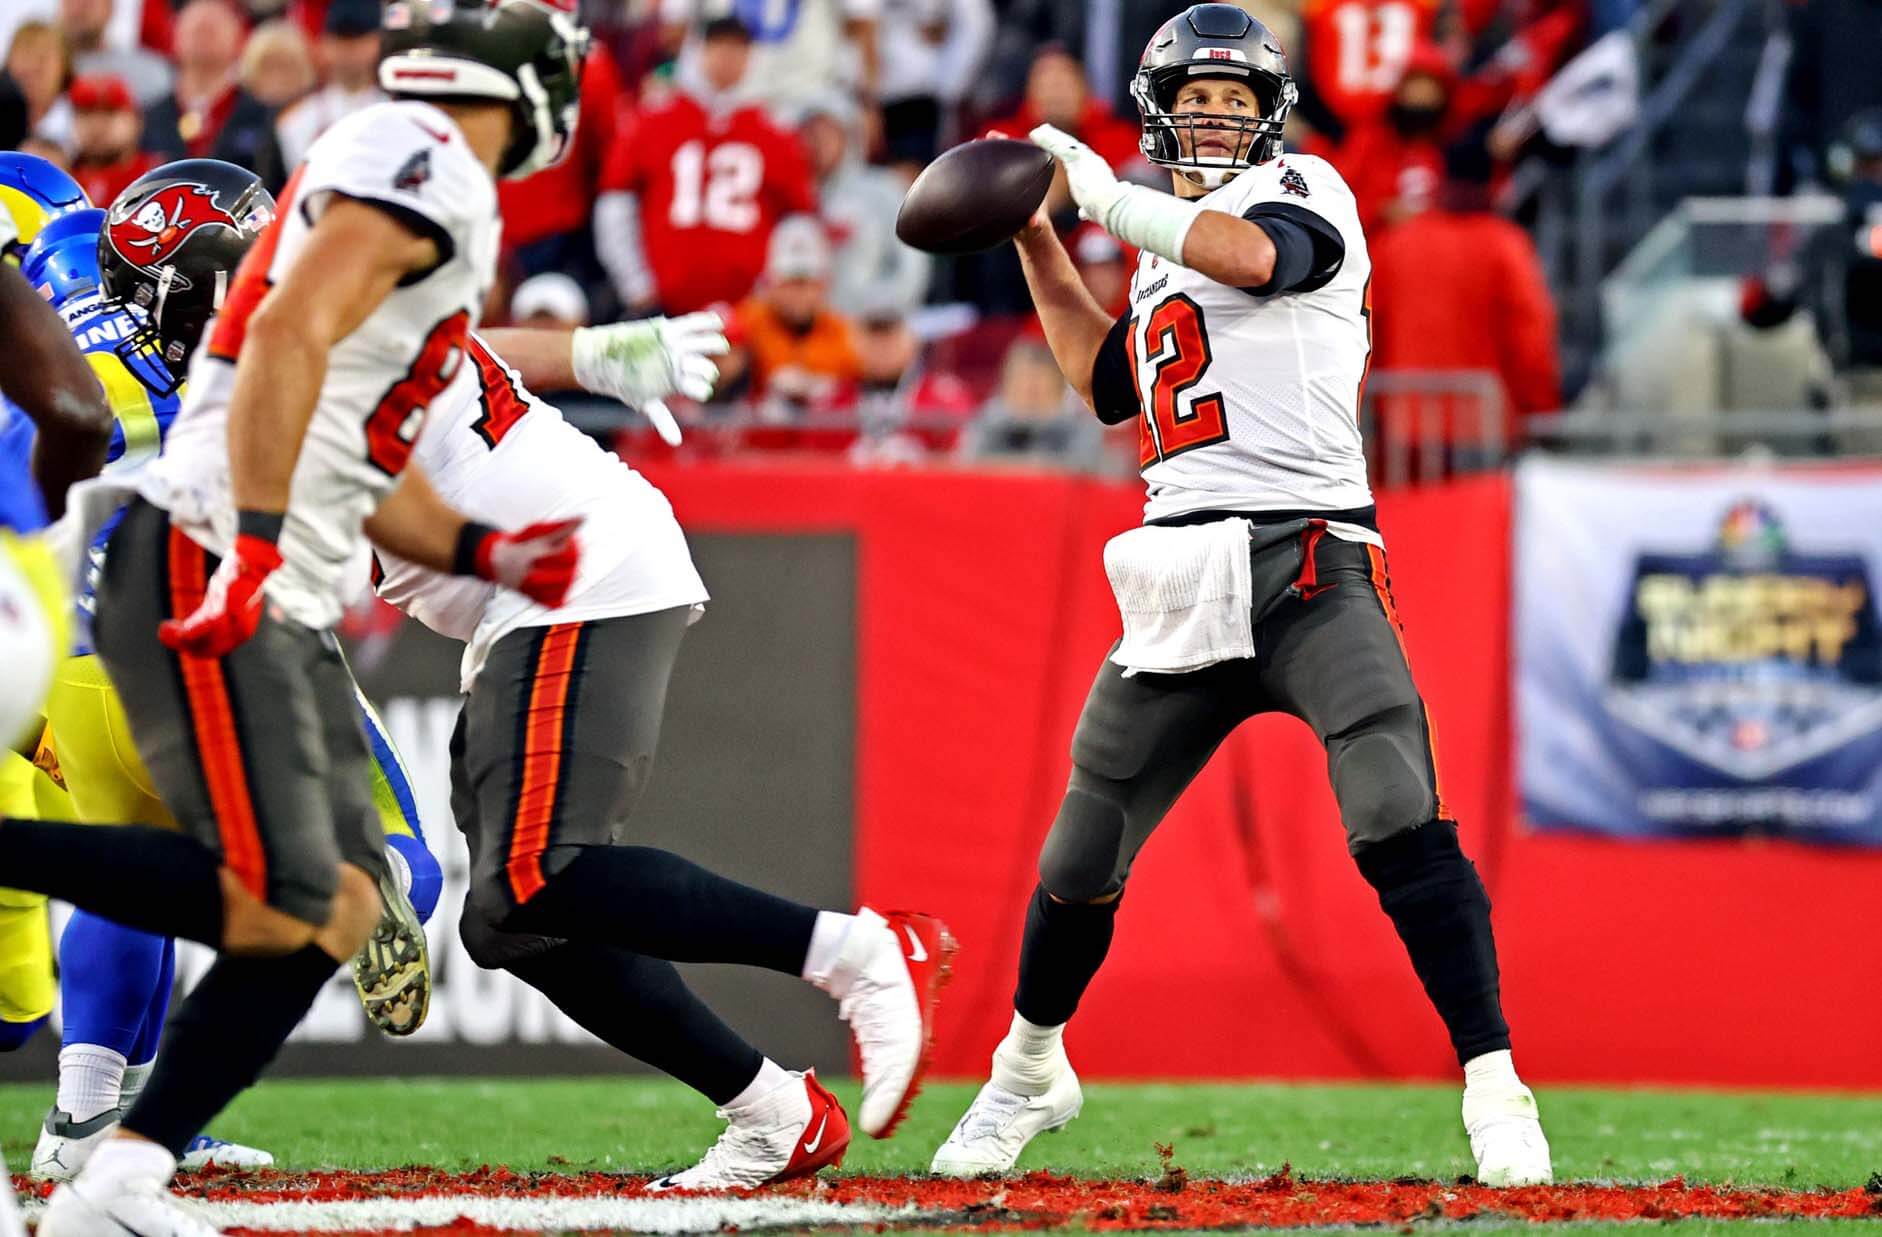 Tampa Bay Buccaneers quarterback Tom Brady (12) throws a pass during the second half against the Los Angeles Rams in a NFC Divisional playoff football game at Raymond James Stadium.